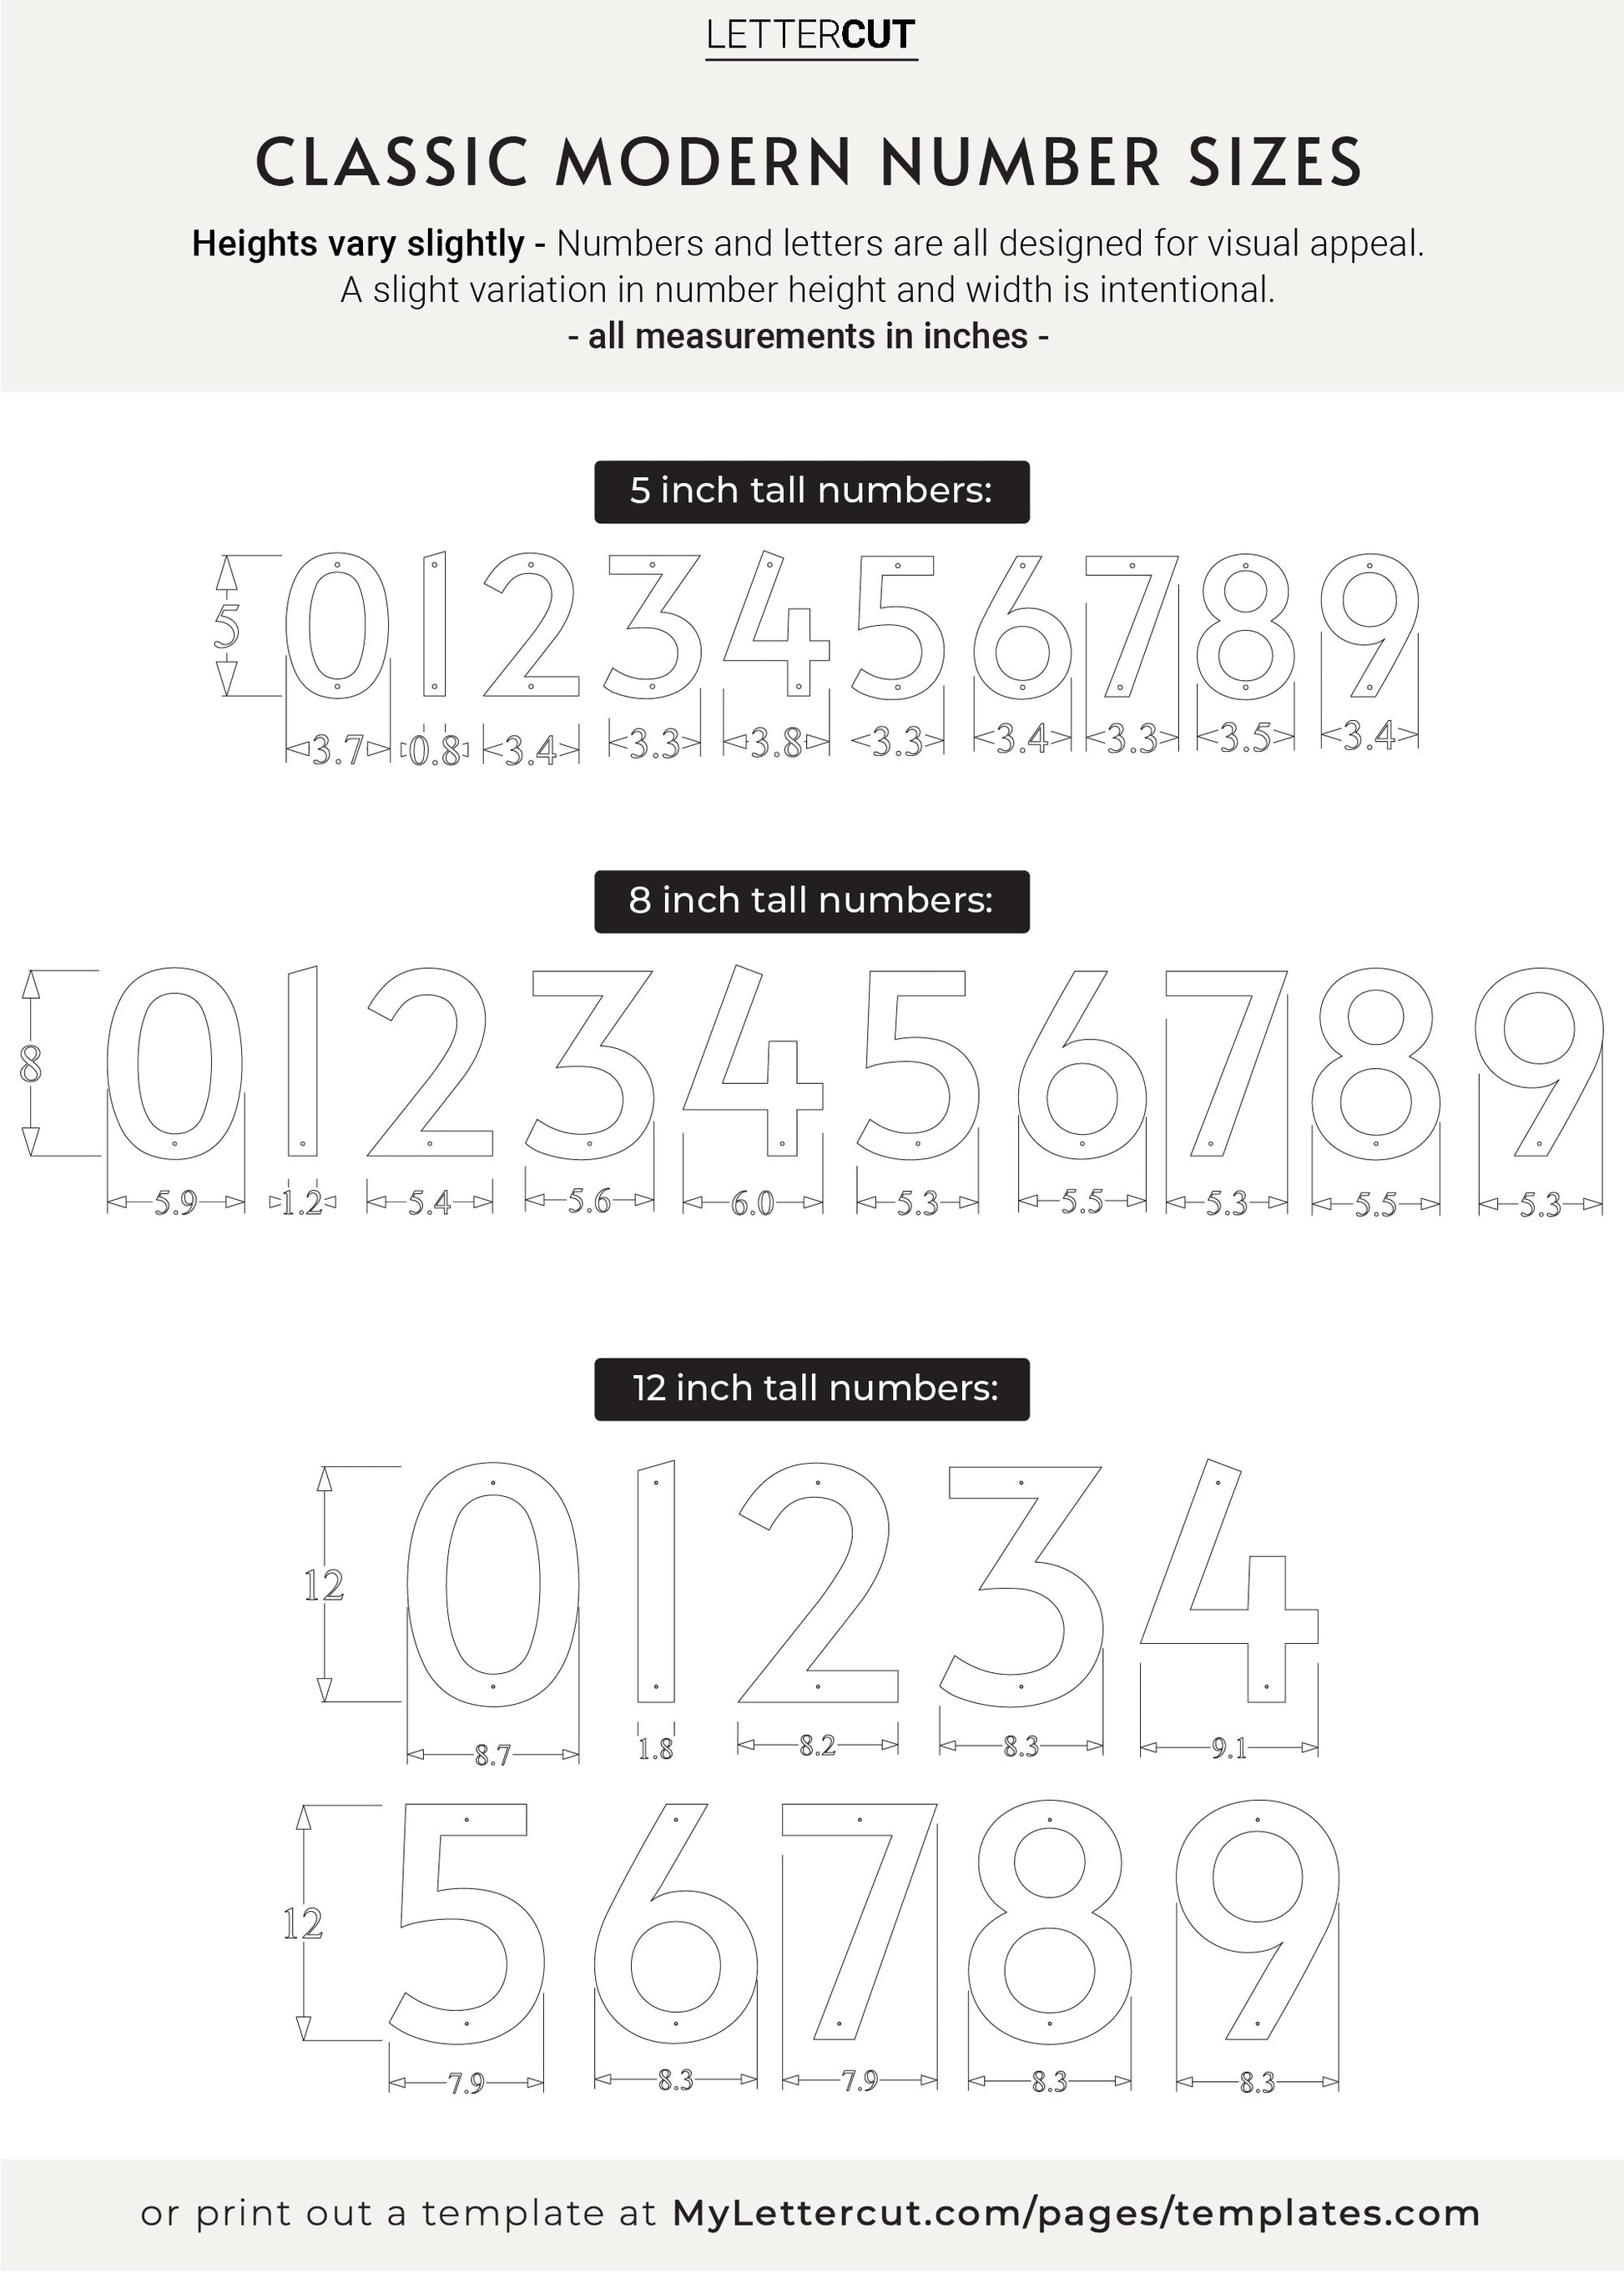 CLASSIC MODERN house number sizes and measurements